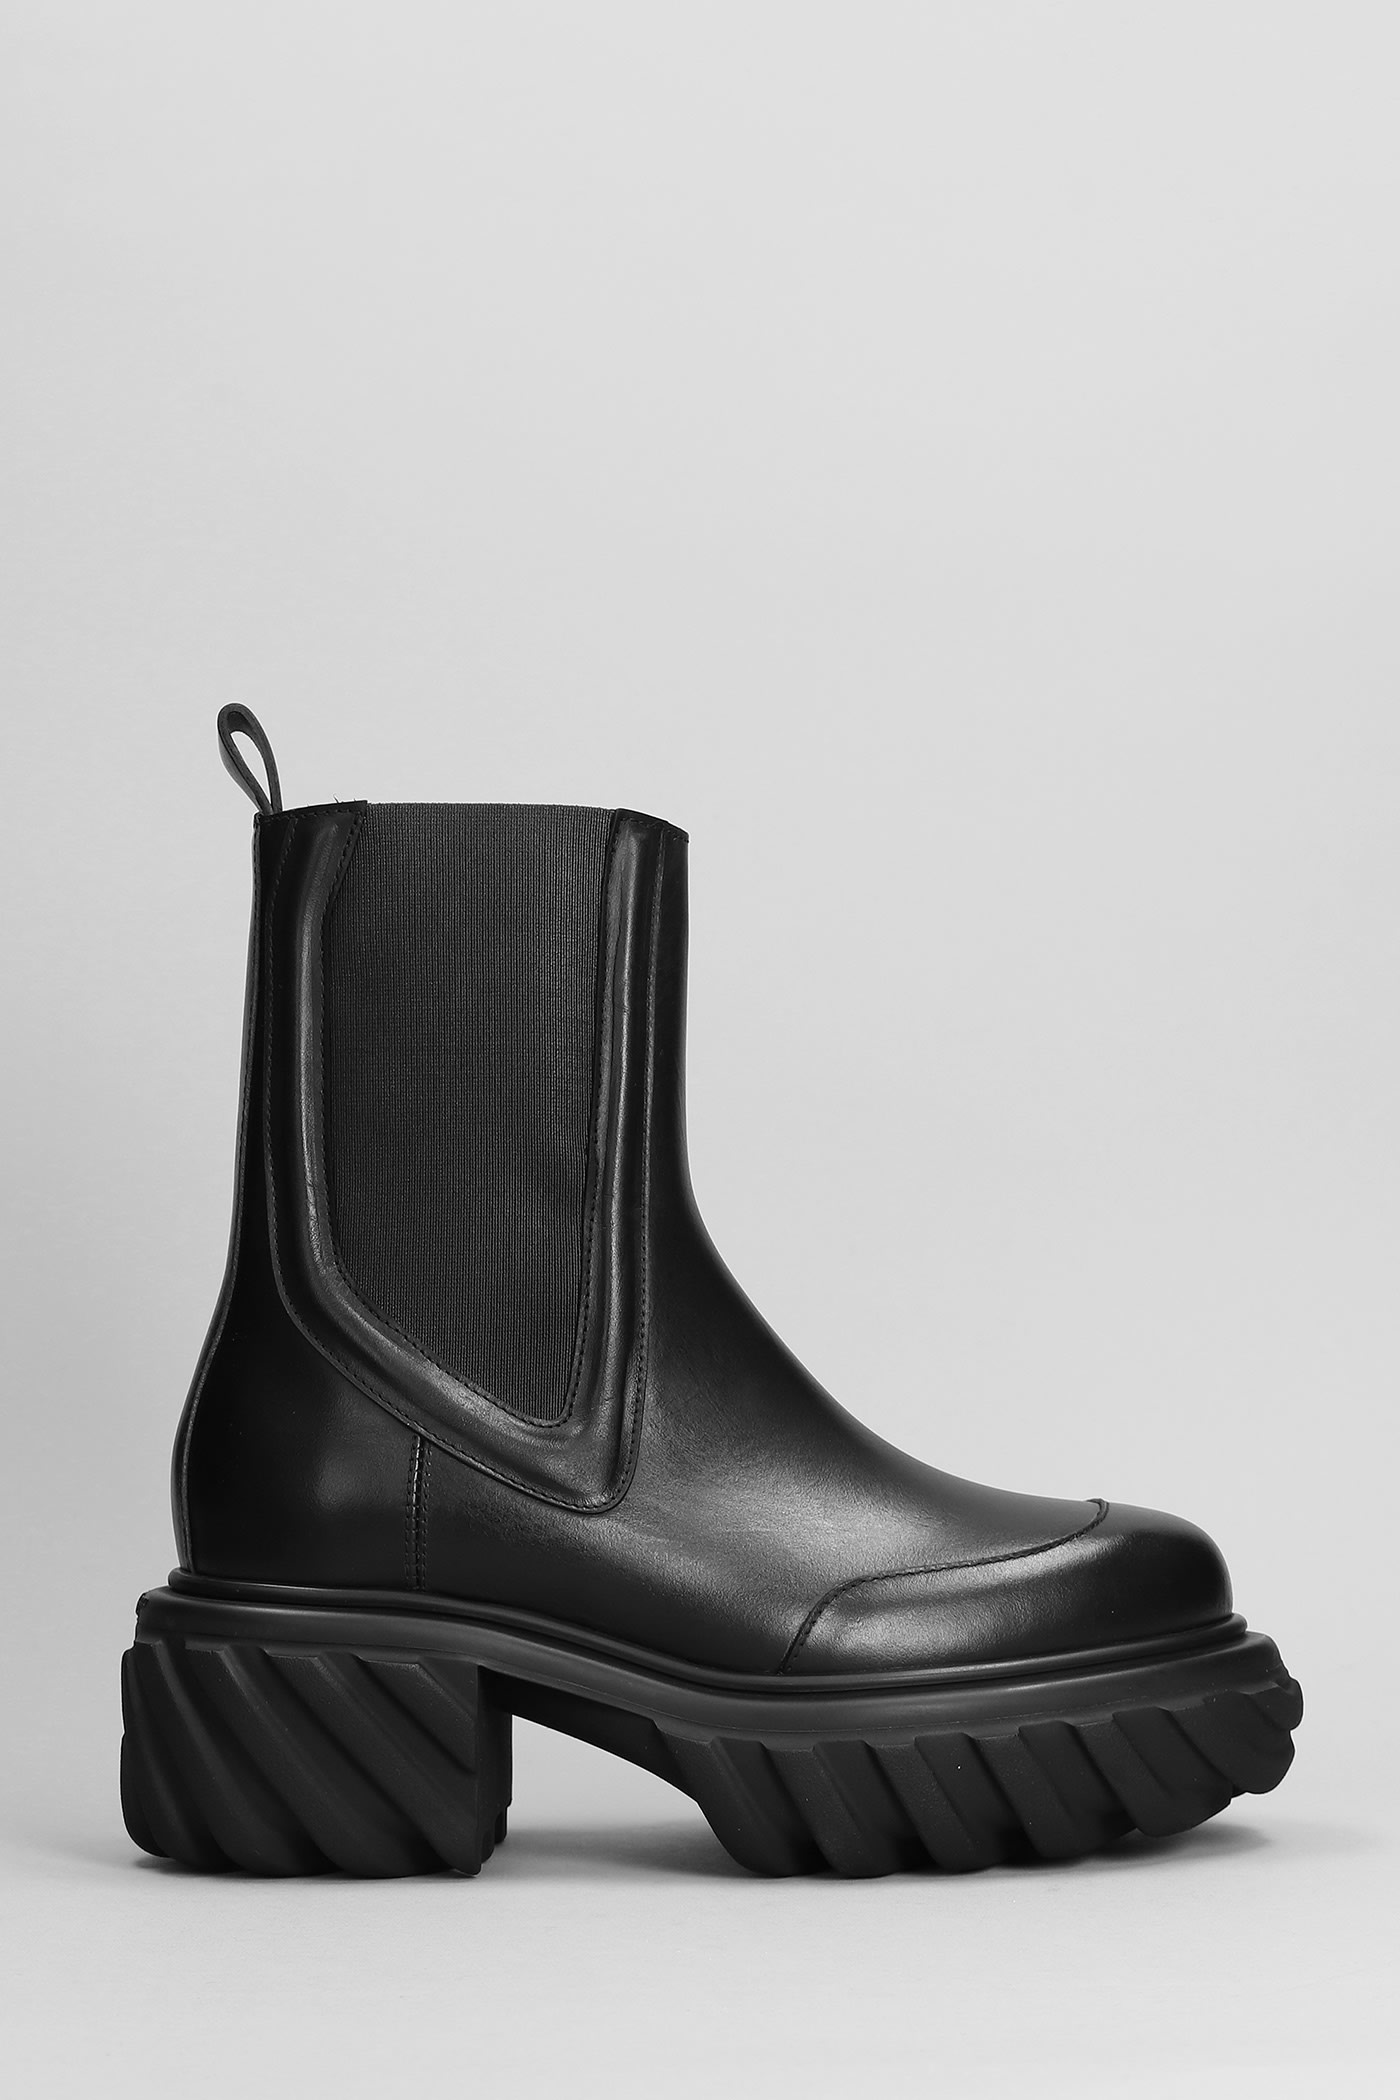 OFF-WHITE TACTOR MOTOR COMBAT BOOTS IN BLACK LEATHER